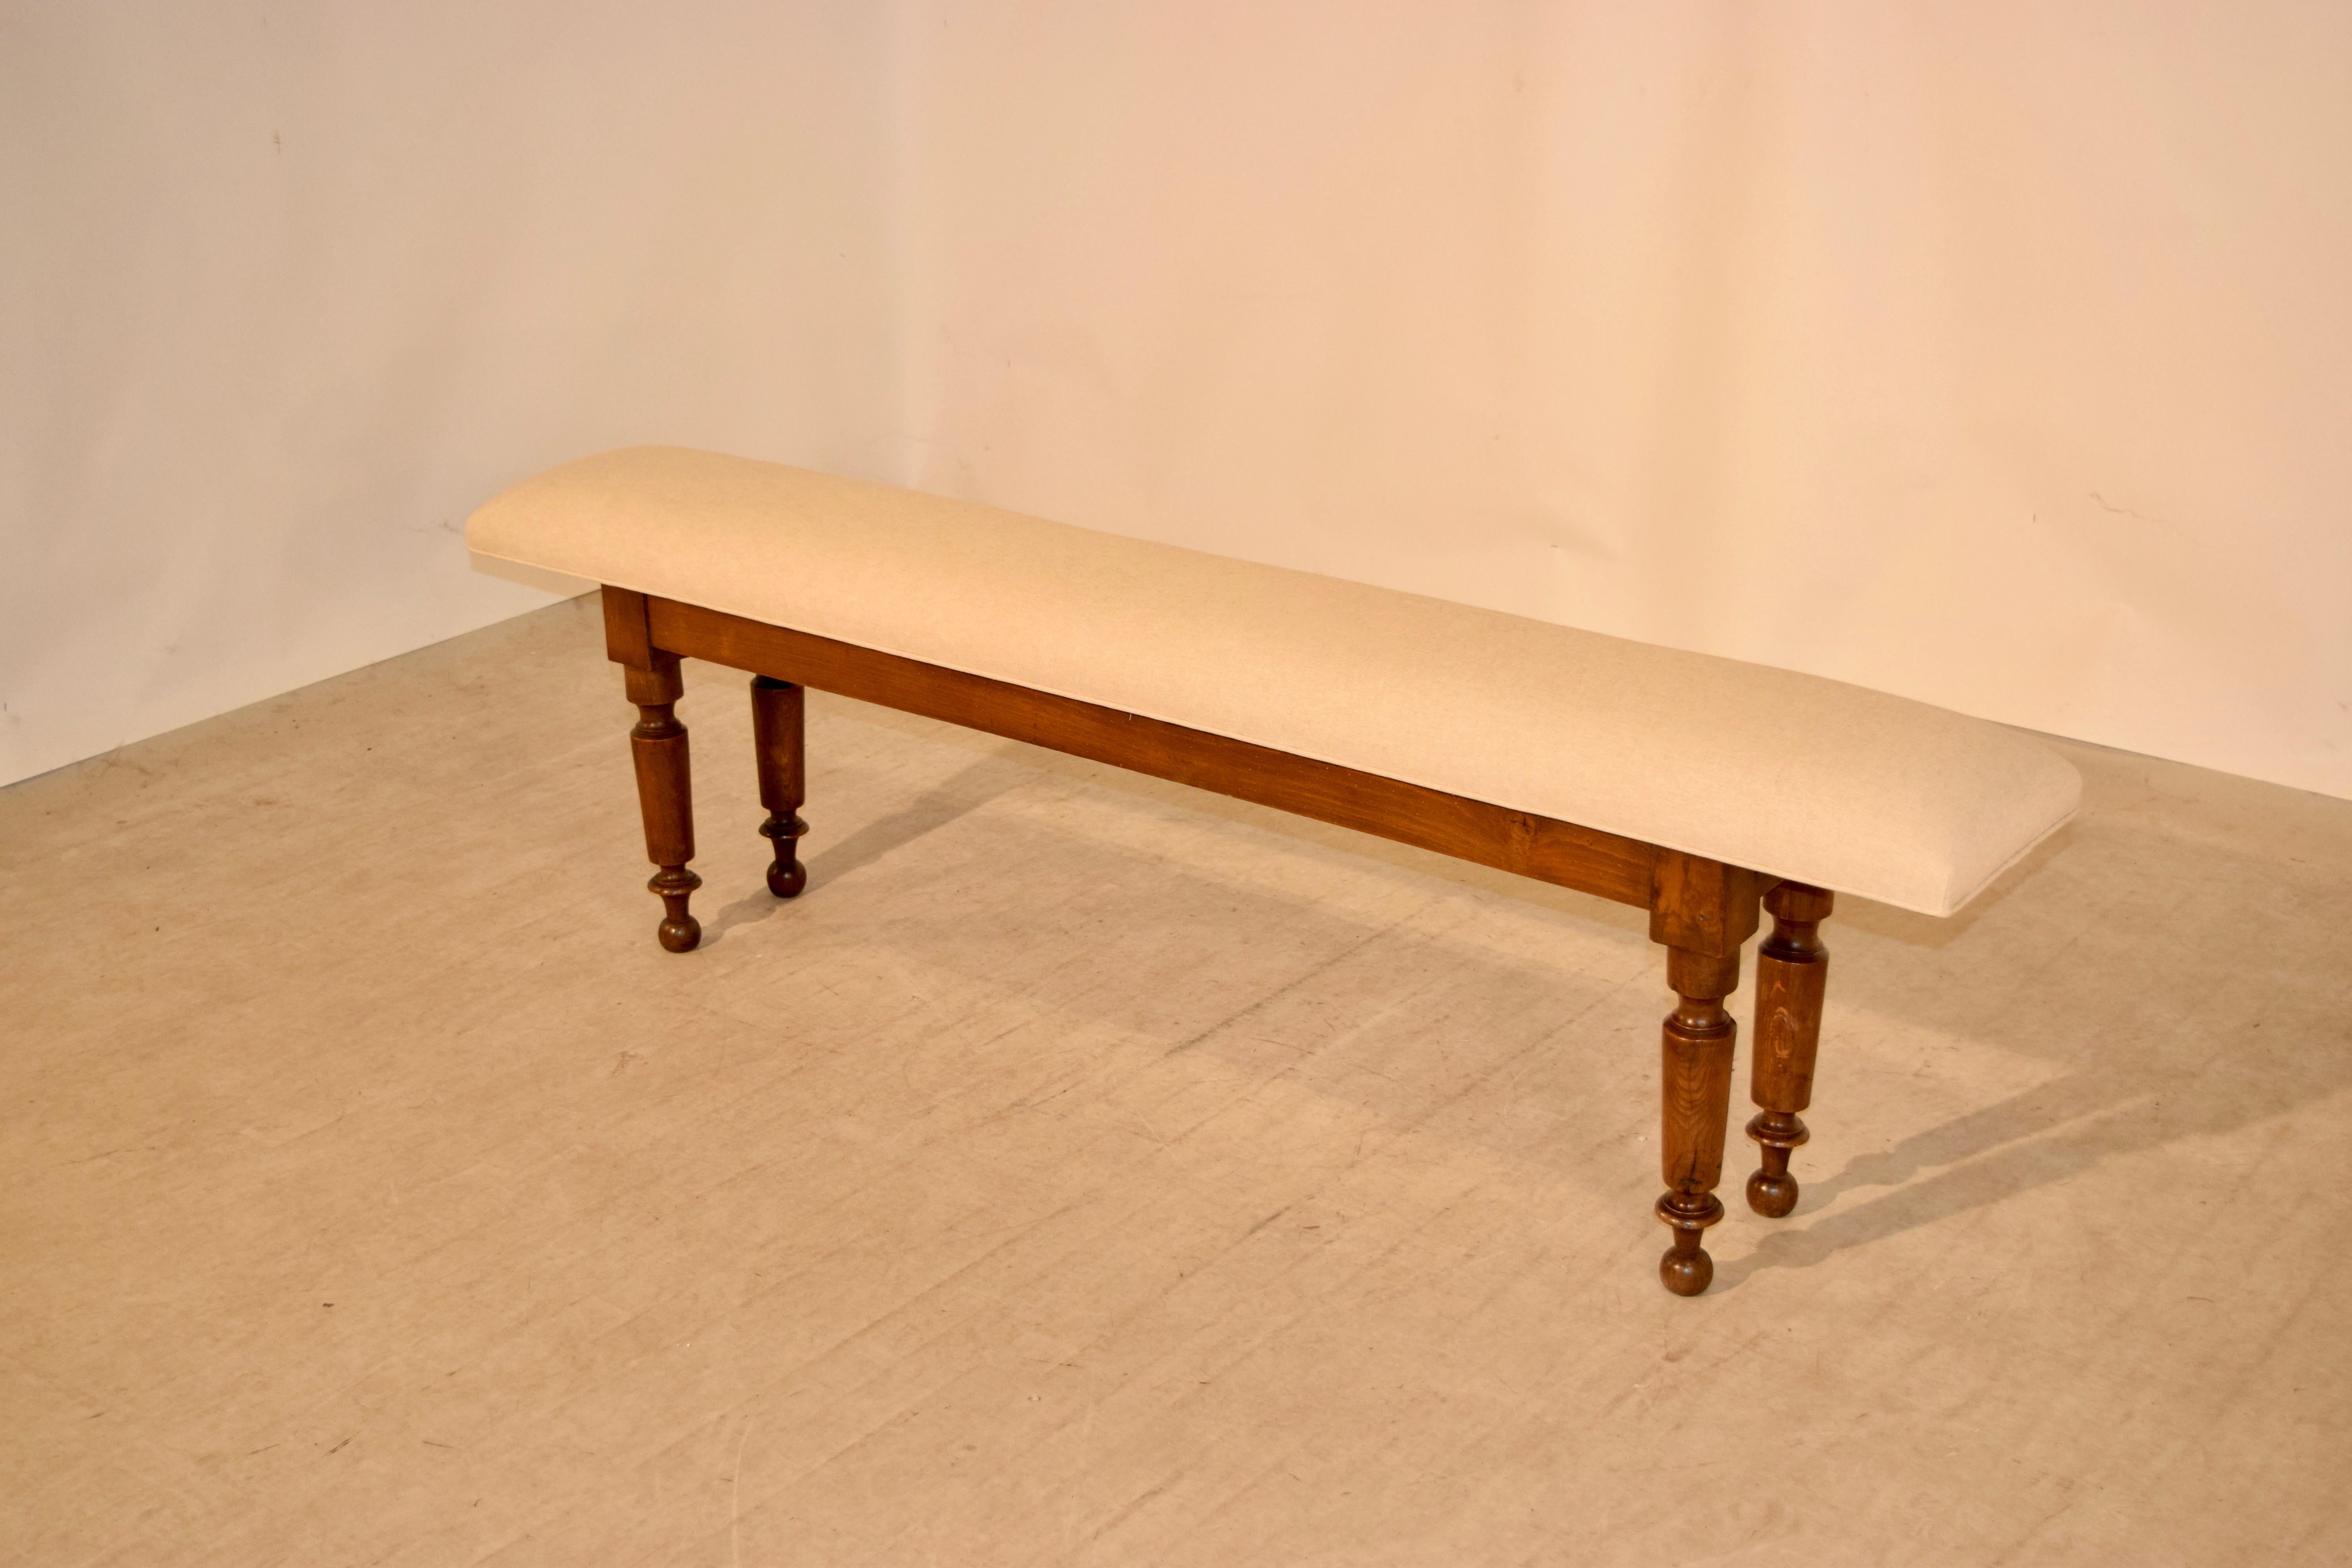 18th century Georgian bench made from oak with a newly upholstered seat in linen. The legs are nicely turned and have signs of old shrinkage. Great length.